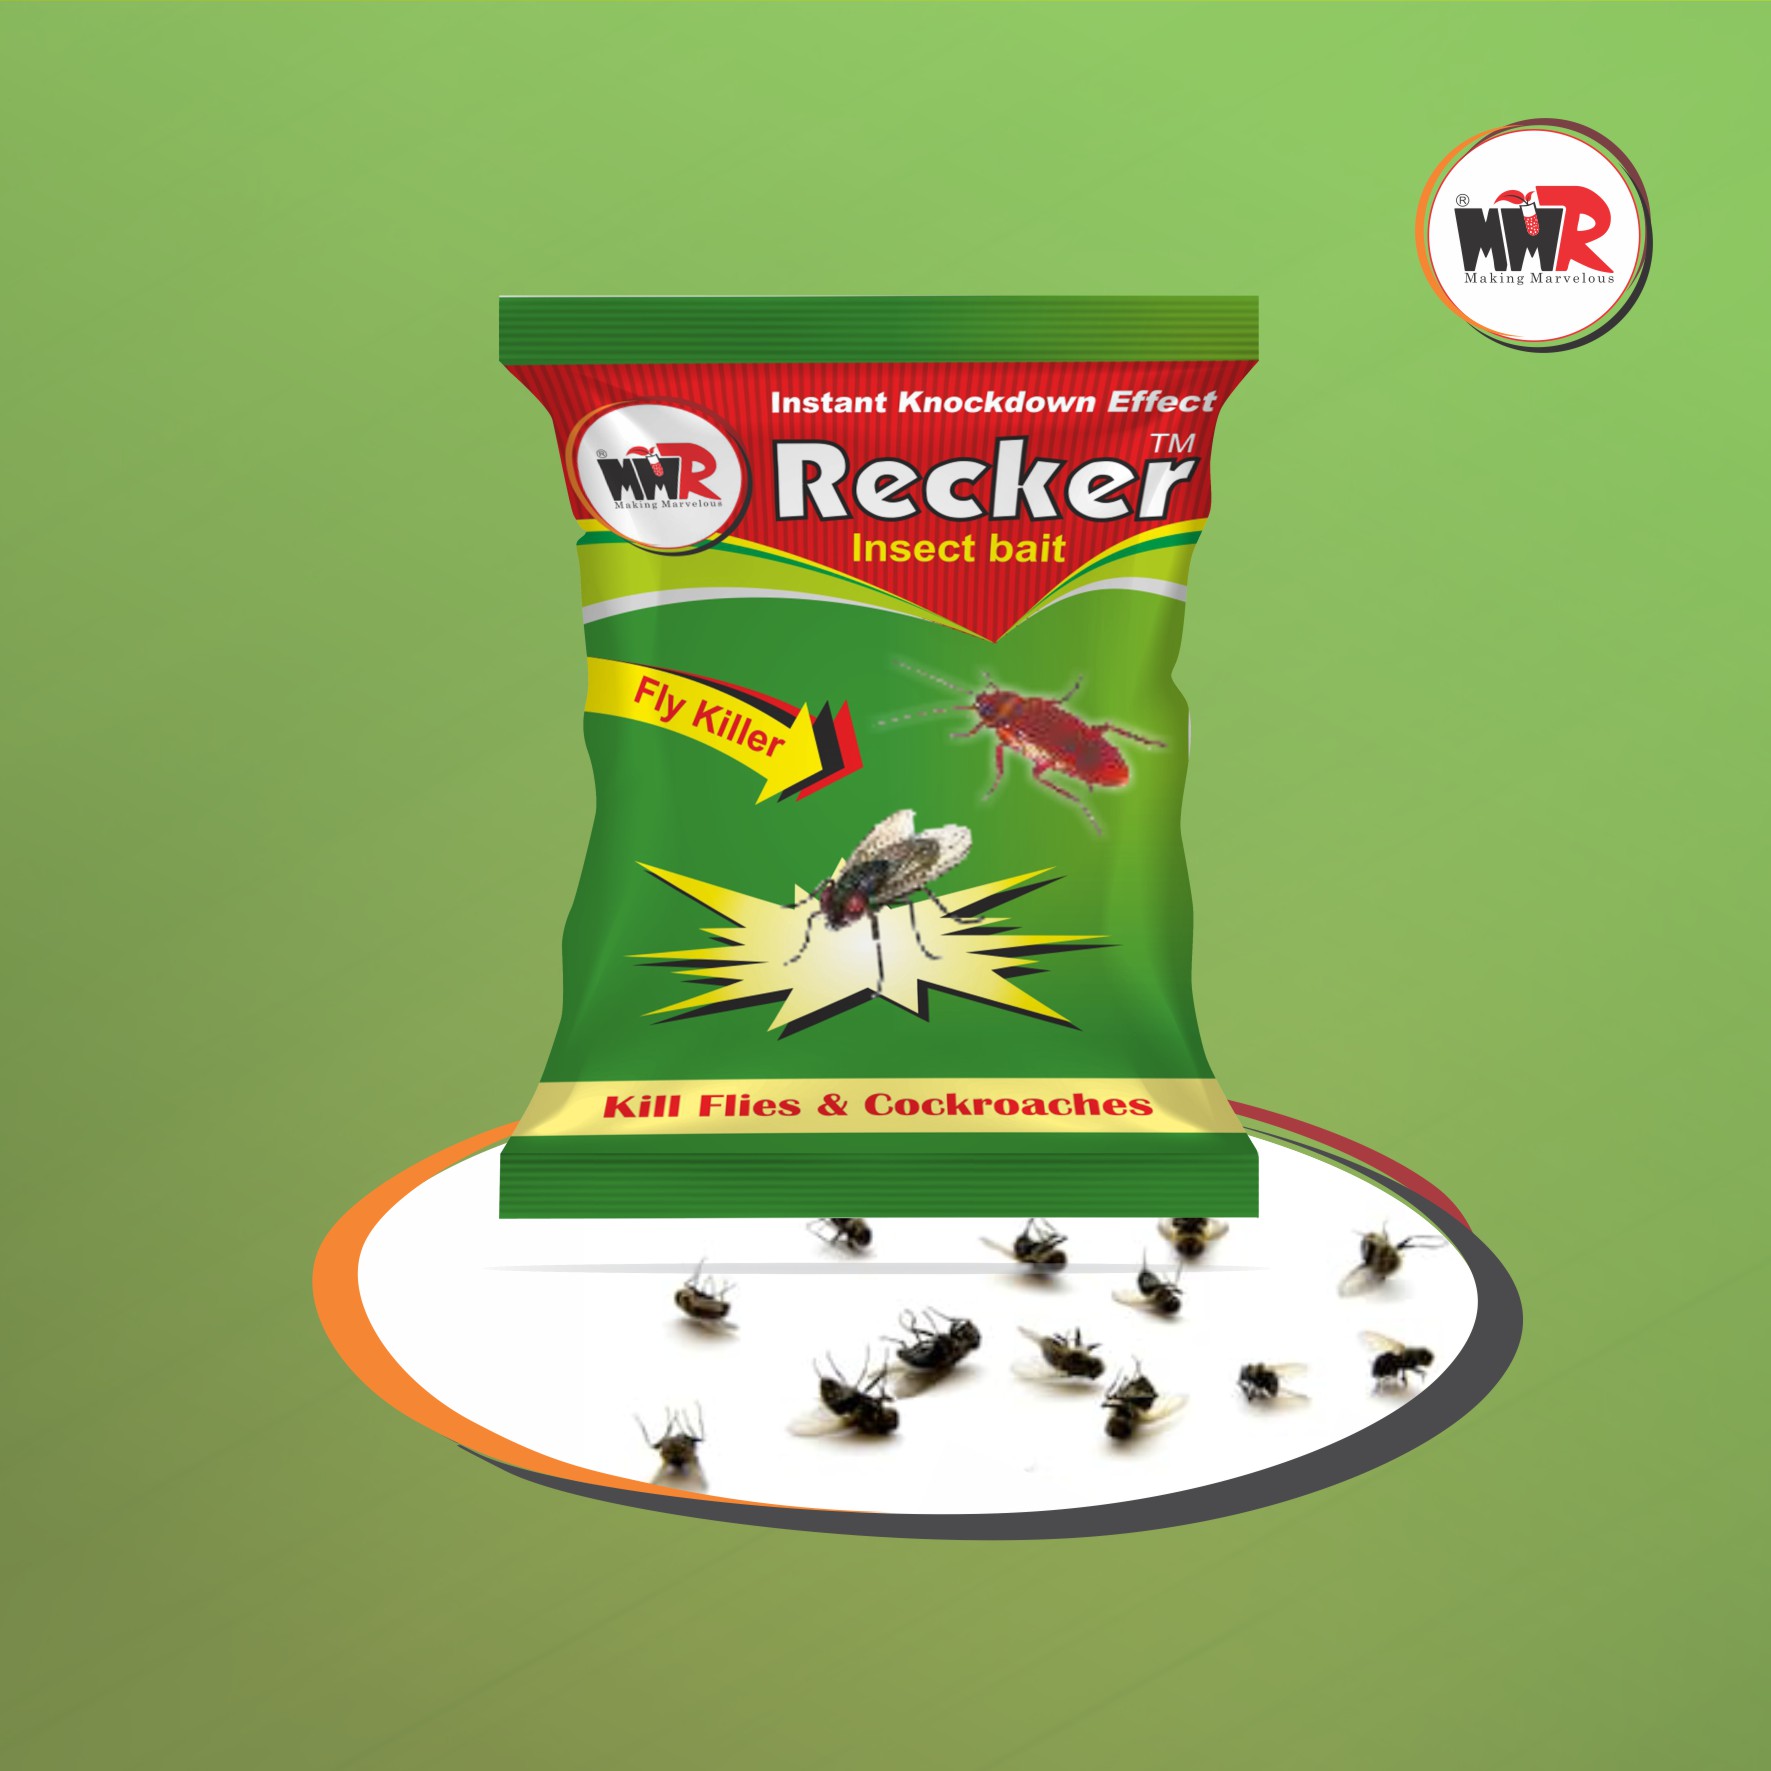 Recker Insect Bait